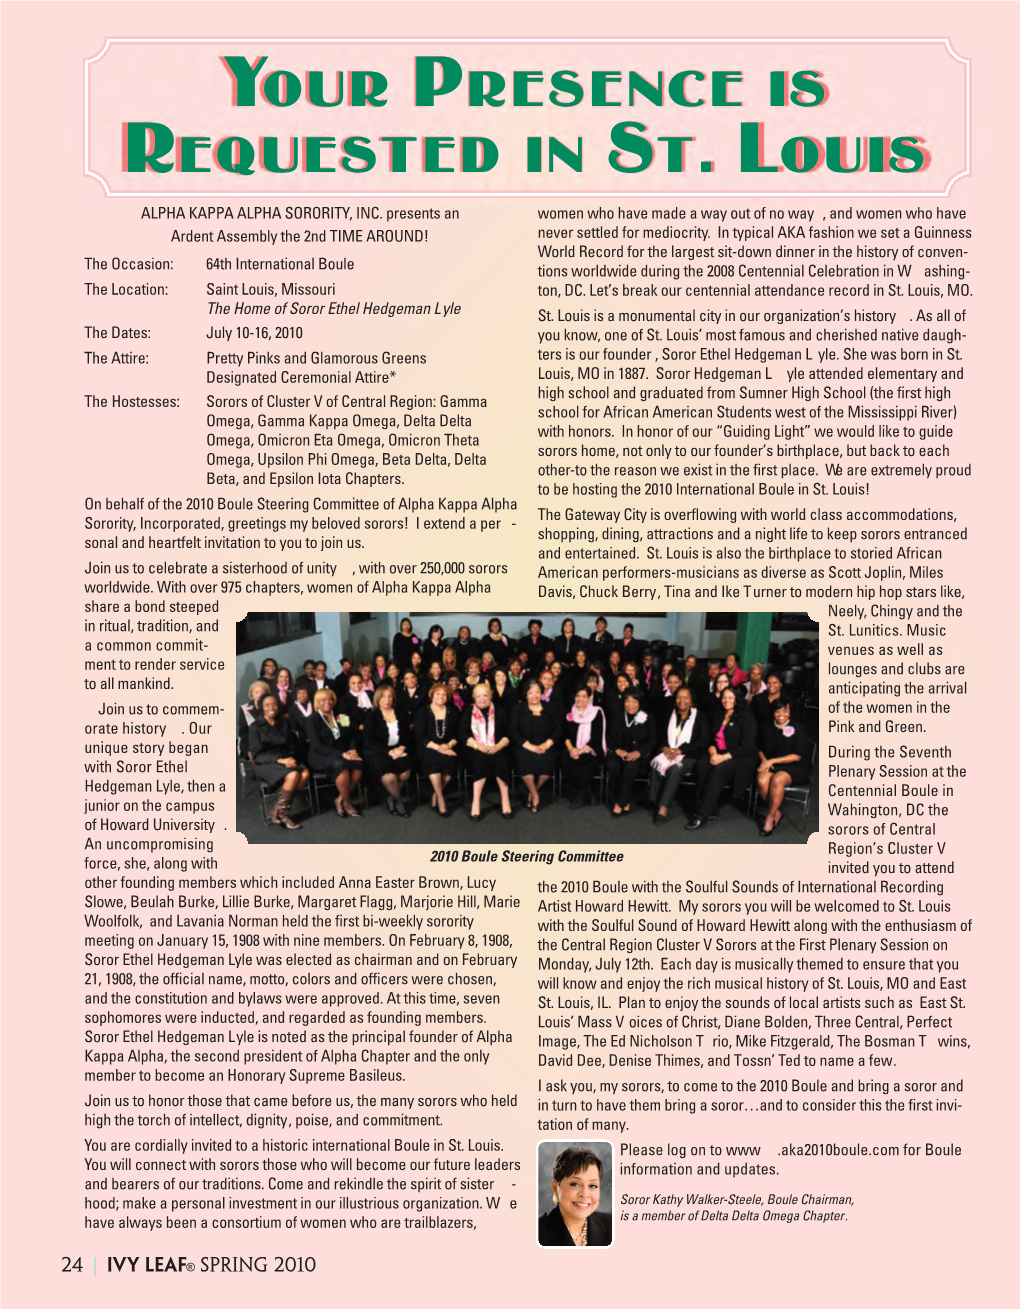 Your Presence Is Requested in St. Louis ALPHA KAPPA ALPHA SORORITY, INC